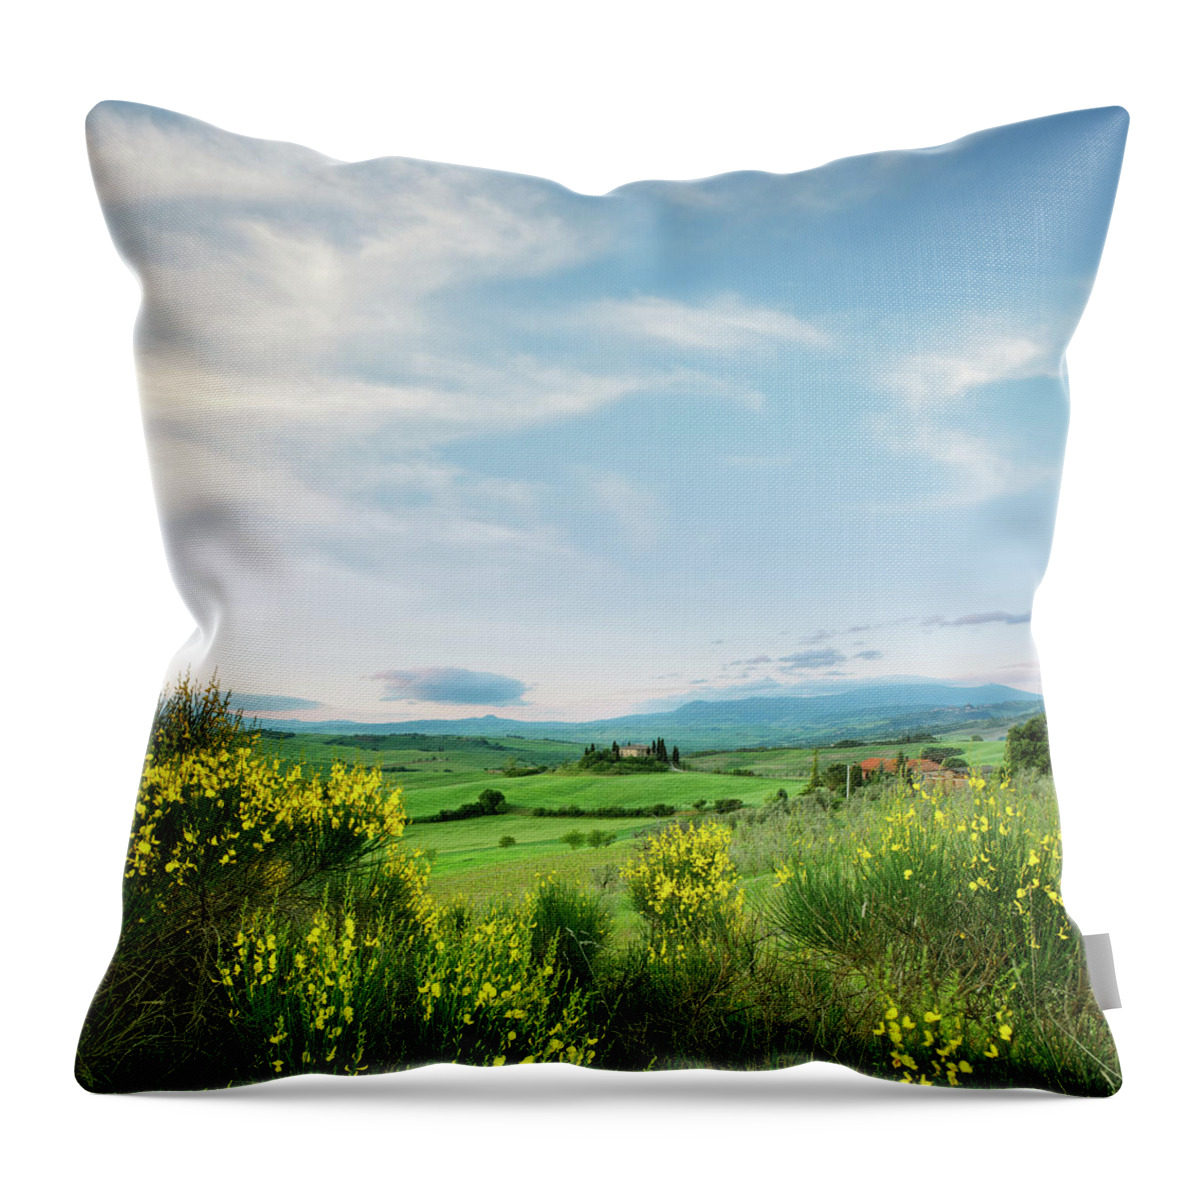 Scenics Throw Pillow featuring the photograph Farm In Tuscany #4 by Mammuth